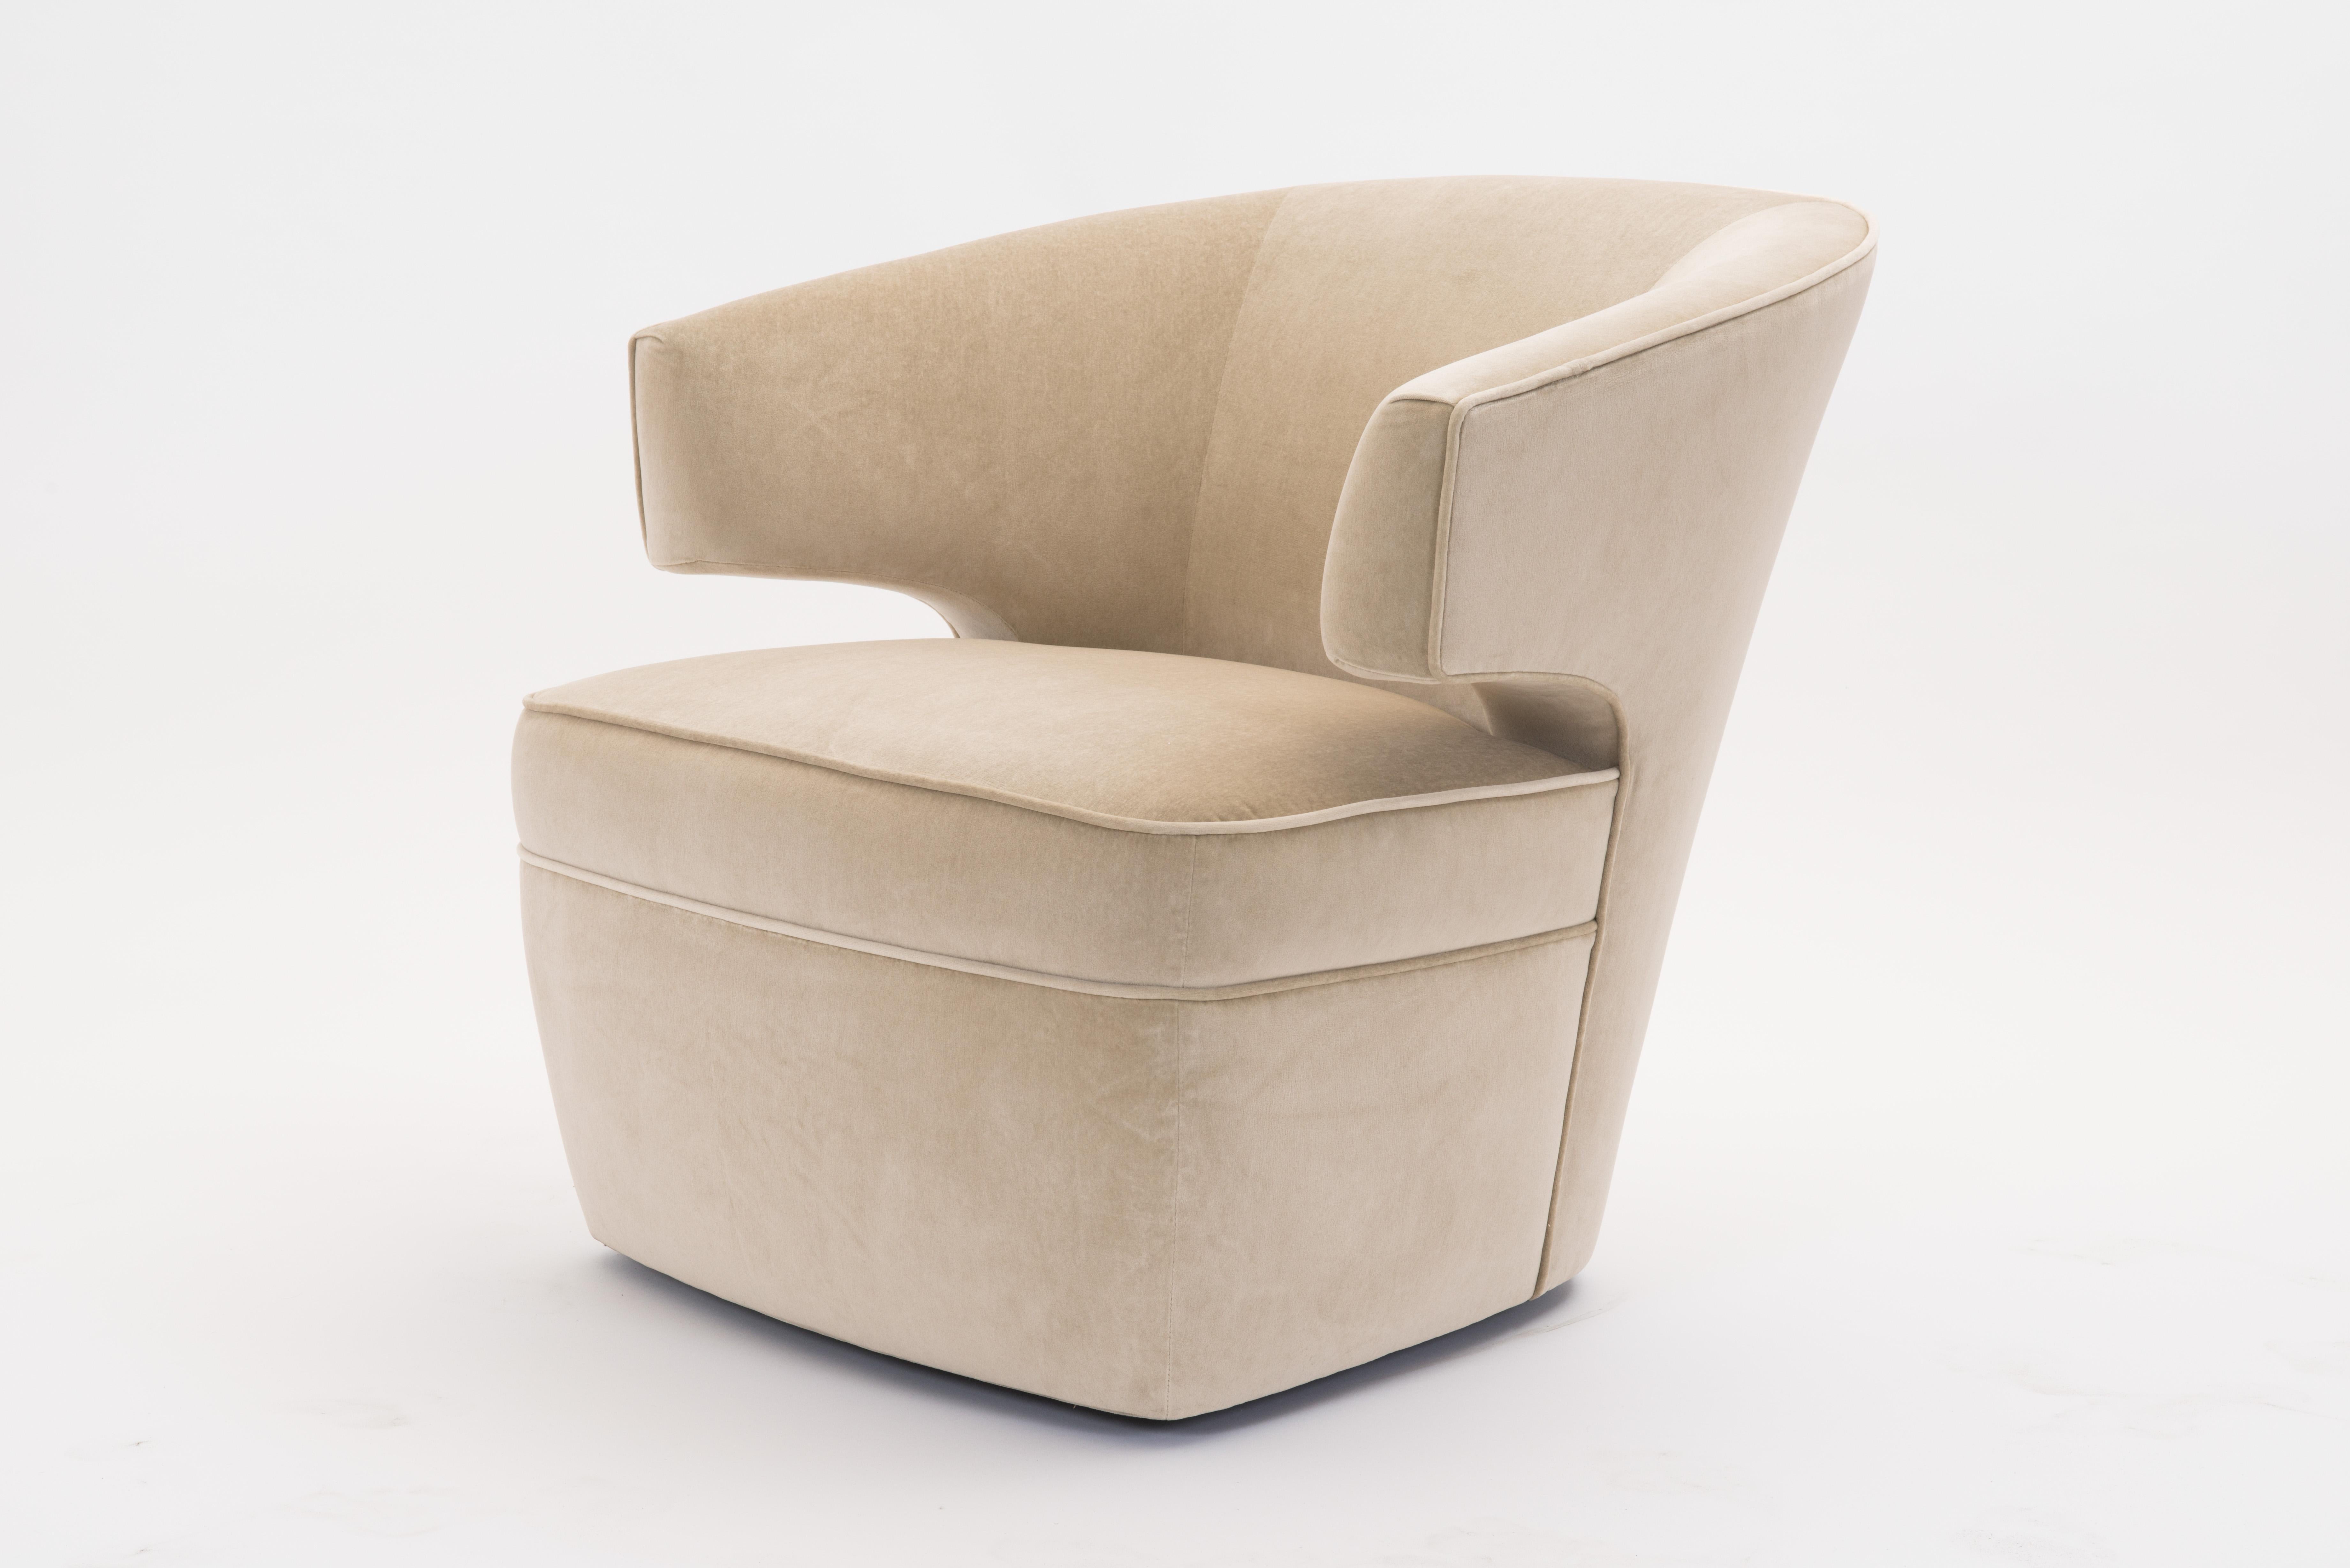 Fully upholstered club chair with tight seat on a concealed maple wood swivel base finished in brown mahogany. Comes standard with welt along the perimeter of arms and seat. Upholstered in Donghia Covet in Ivory, item #10158-010, a plush cotton